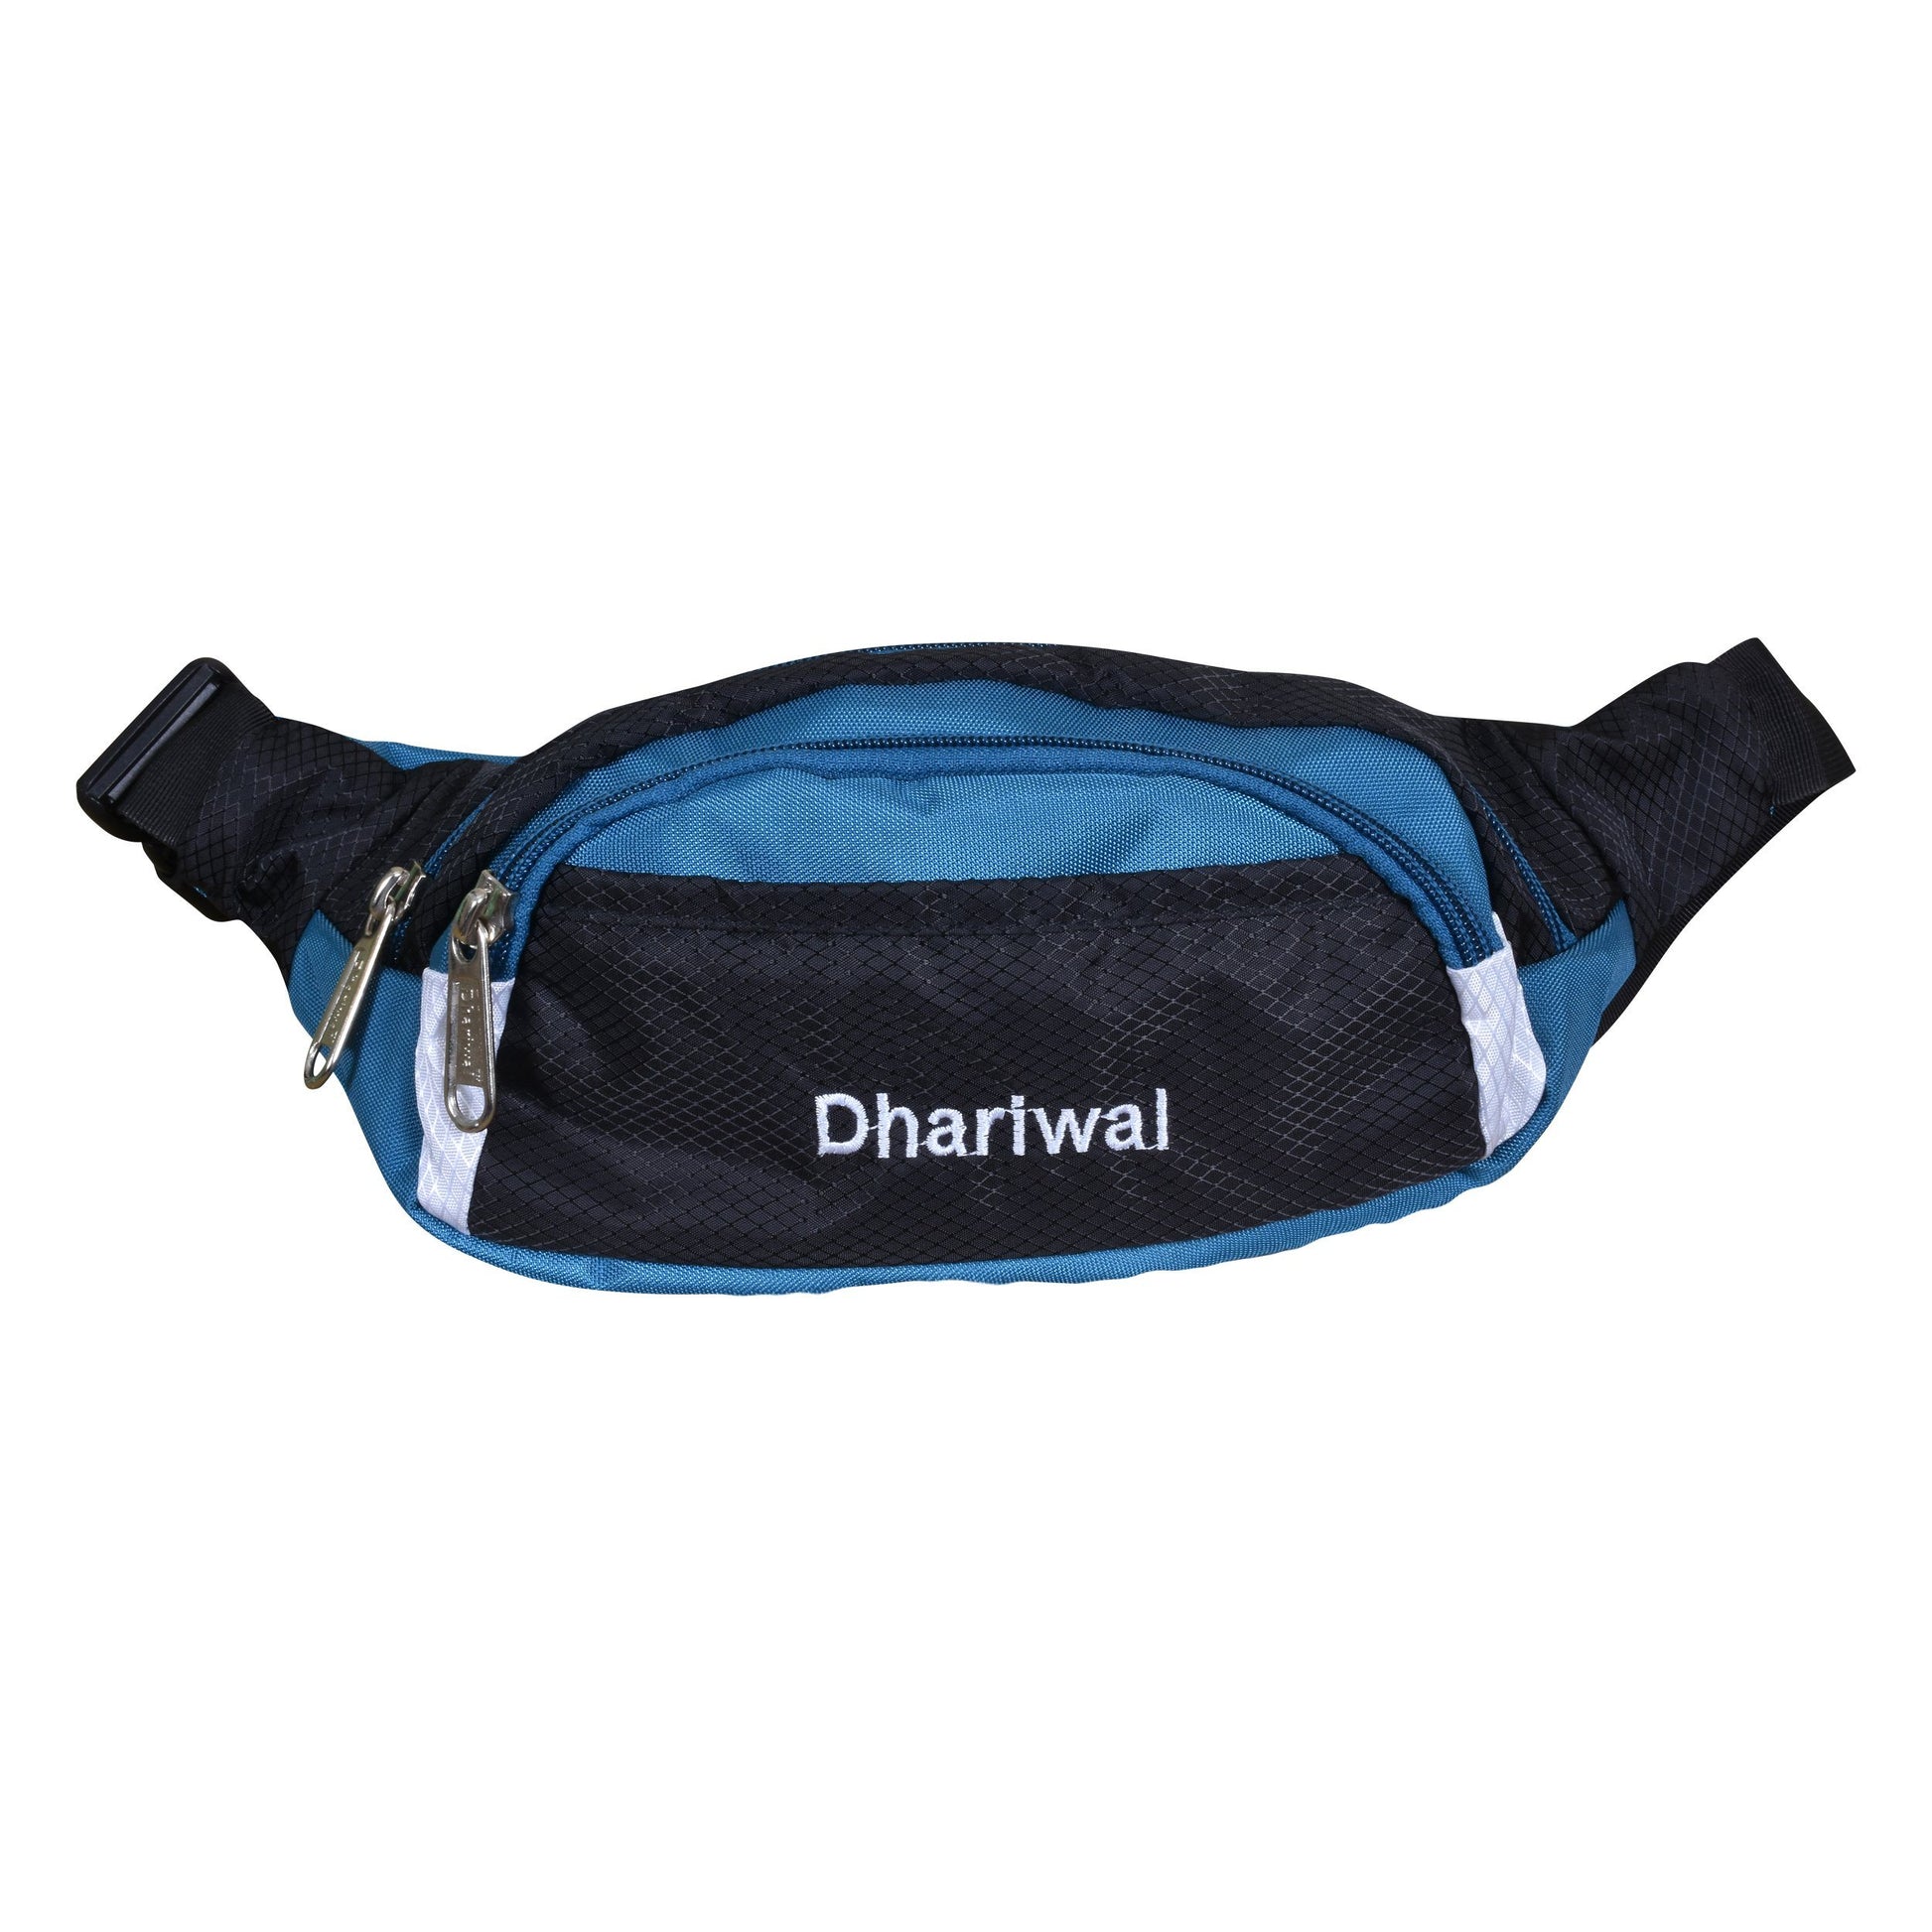 Dhariwal Waist Pack Travel Handy Hiking Zip Pouch Document Money Phone Belt Sport Bag Bum Bag for Men and Women Polyester WP-1201 Waist Pouch Dhariwal Teal 